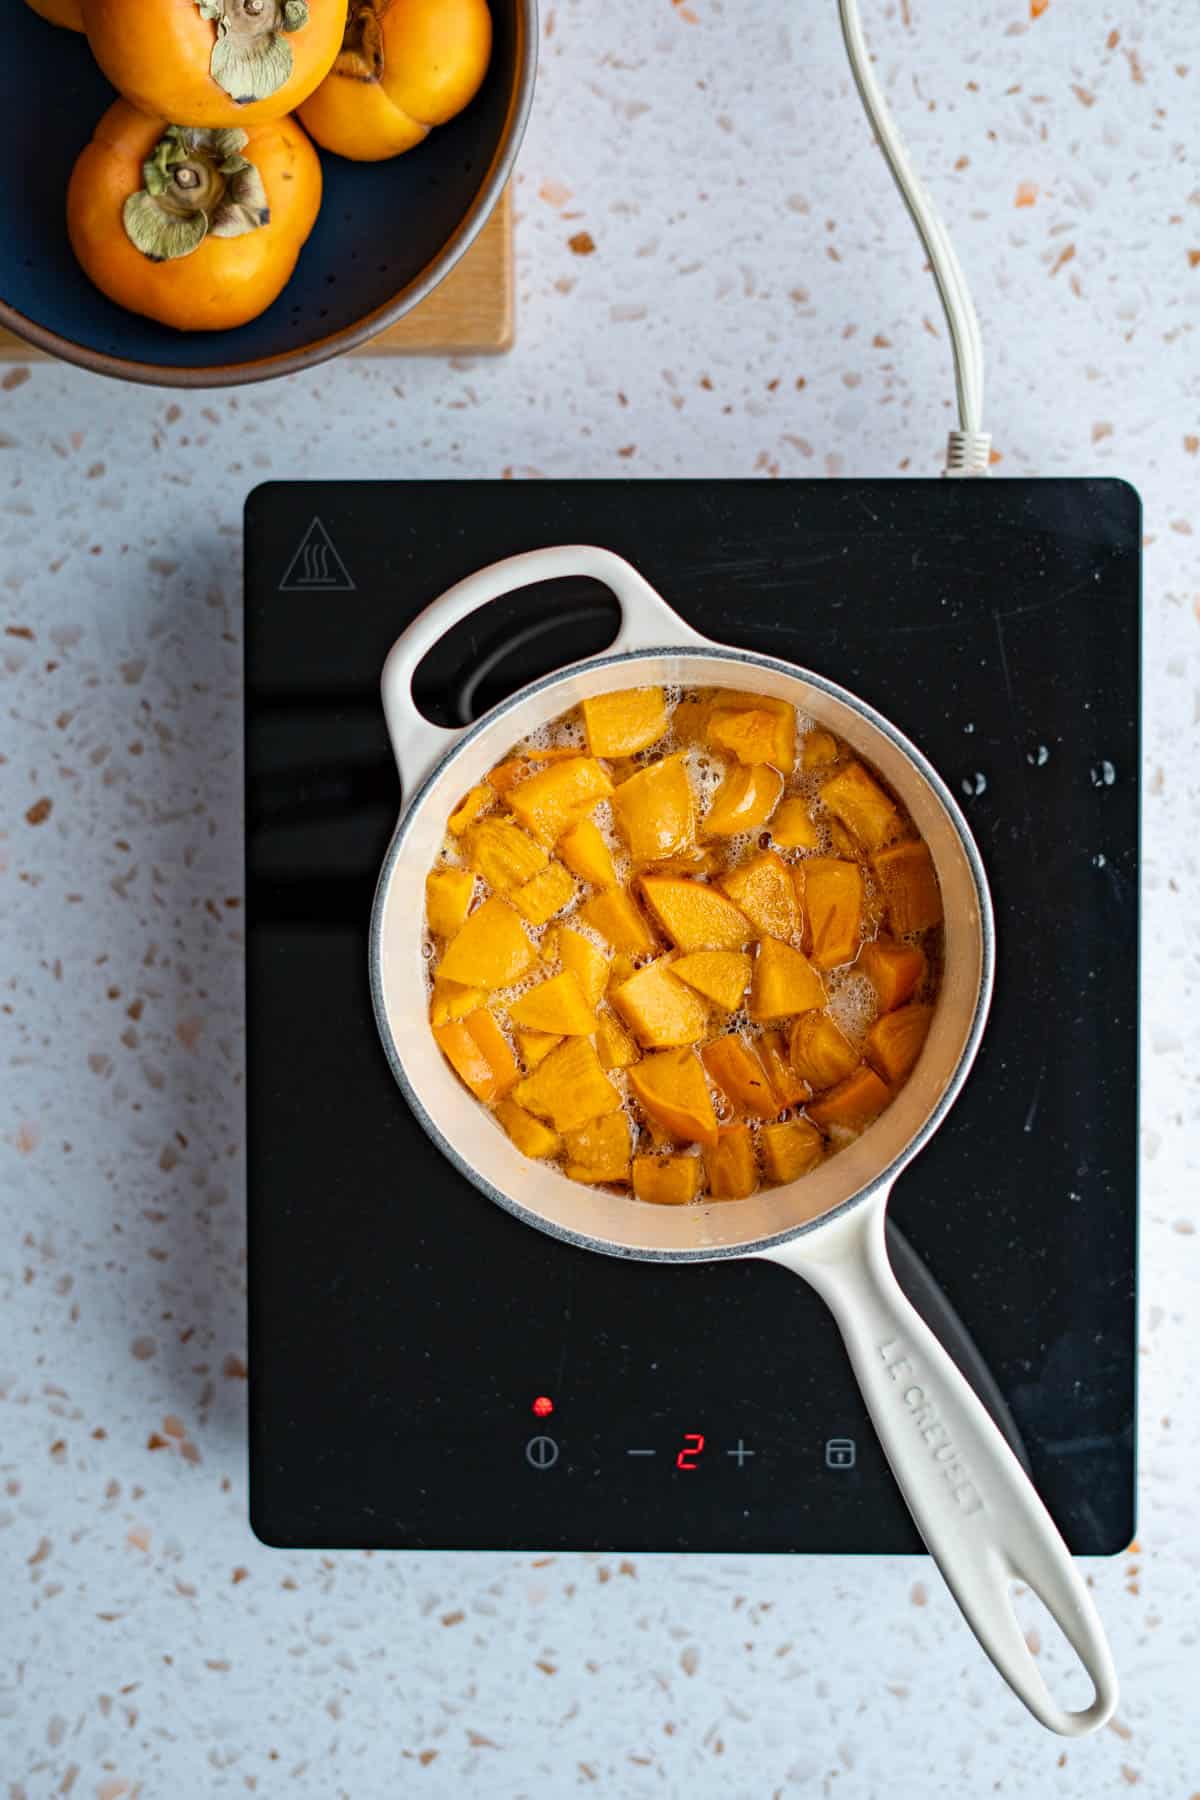 Persimmon simple syrup is simmering in a saucepan on a hotplate.